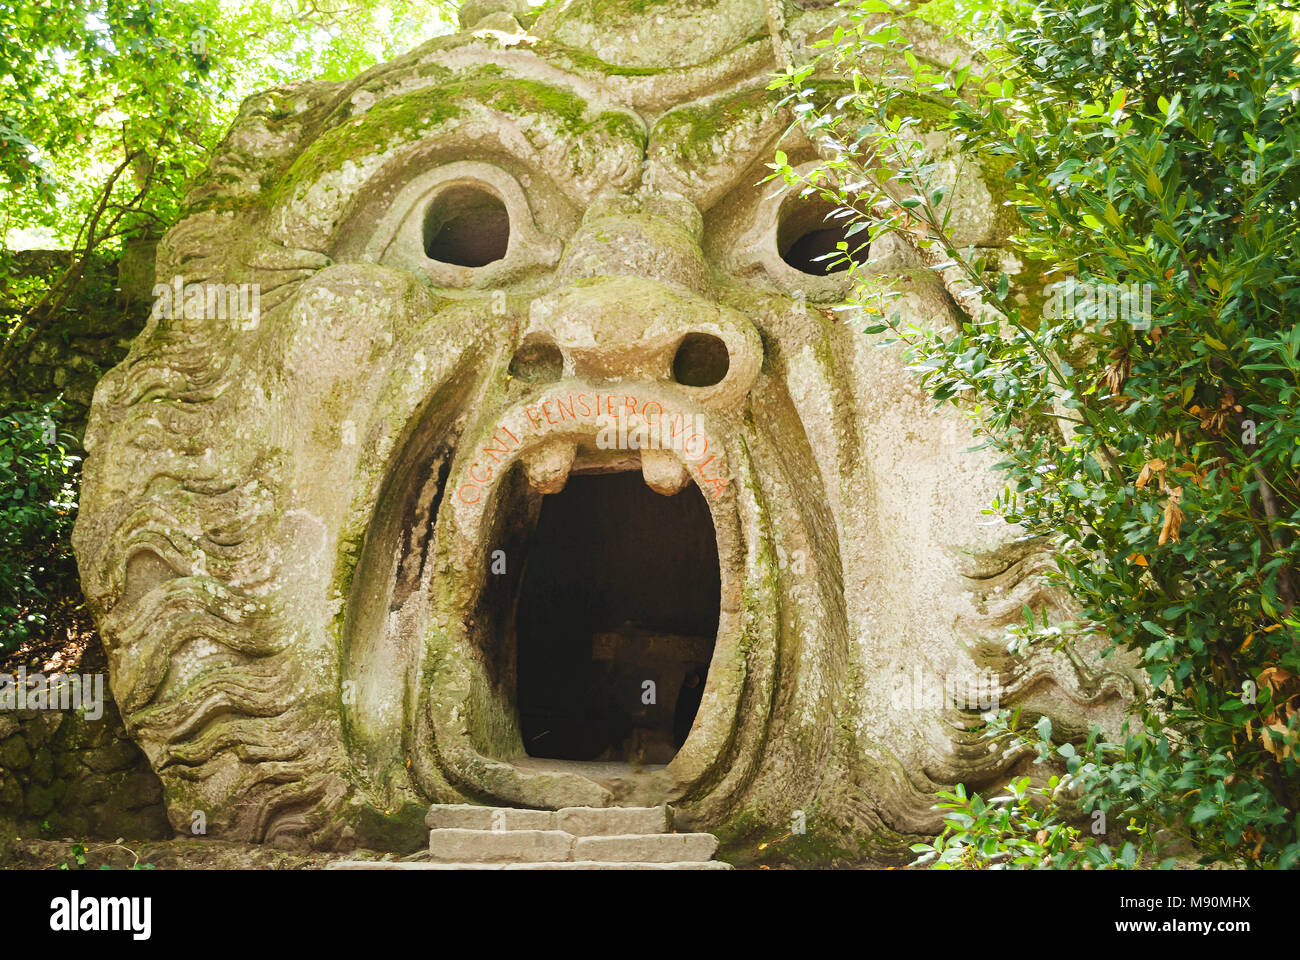 Bomarzo, VT, Italy, july 2014: the mouth of the ogre building inside the Park of the Monsters in Bomarzo, Italy Stock Photo